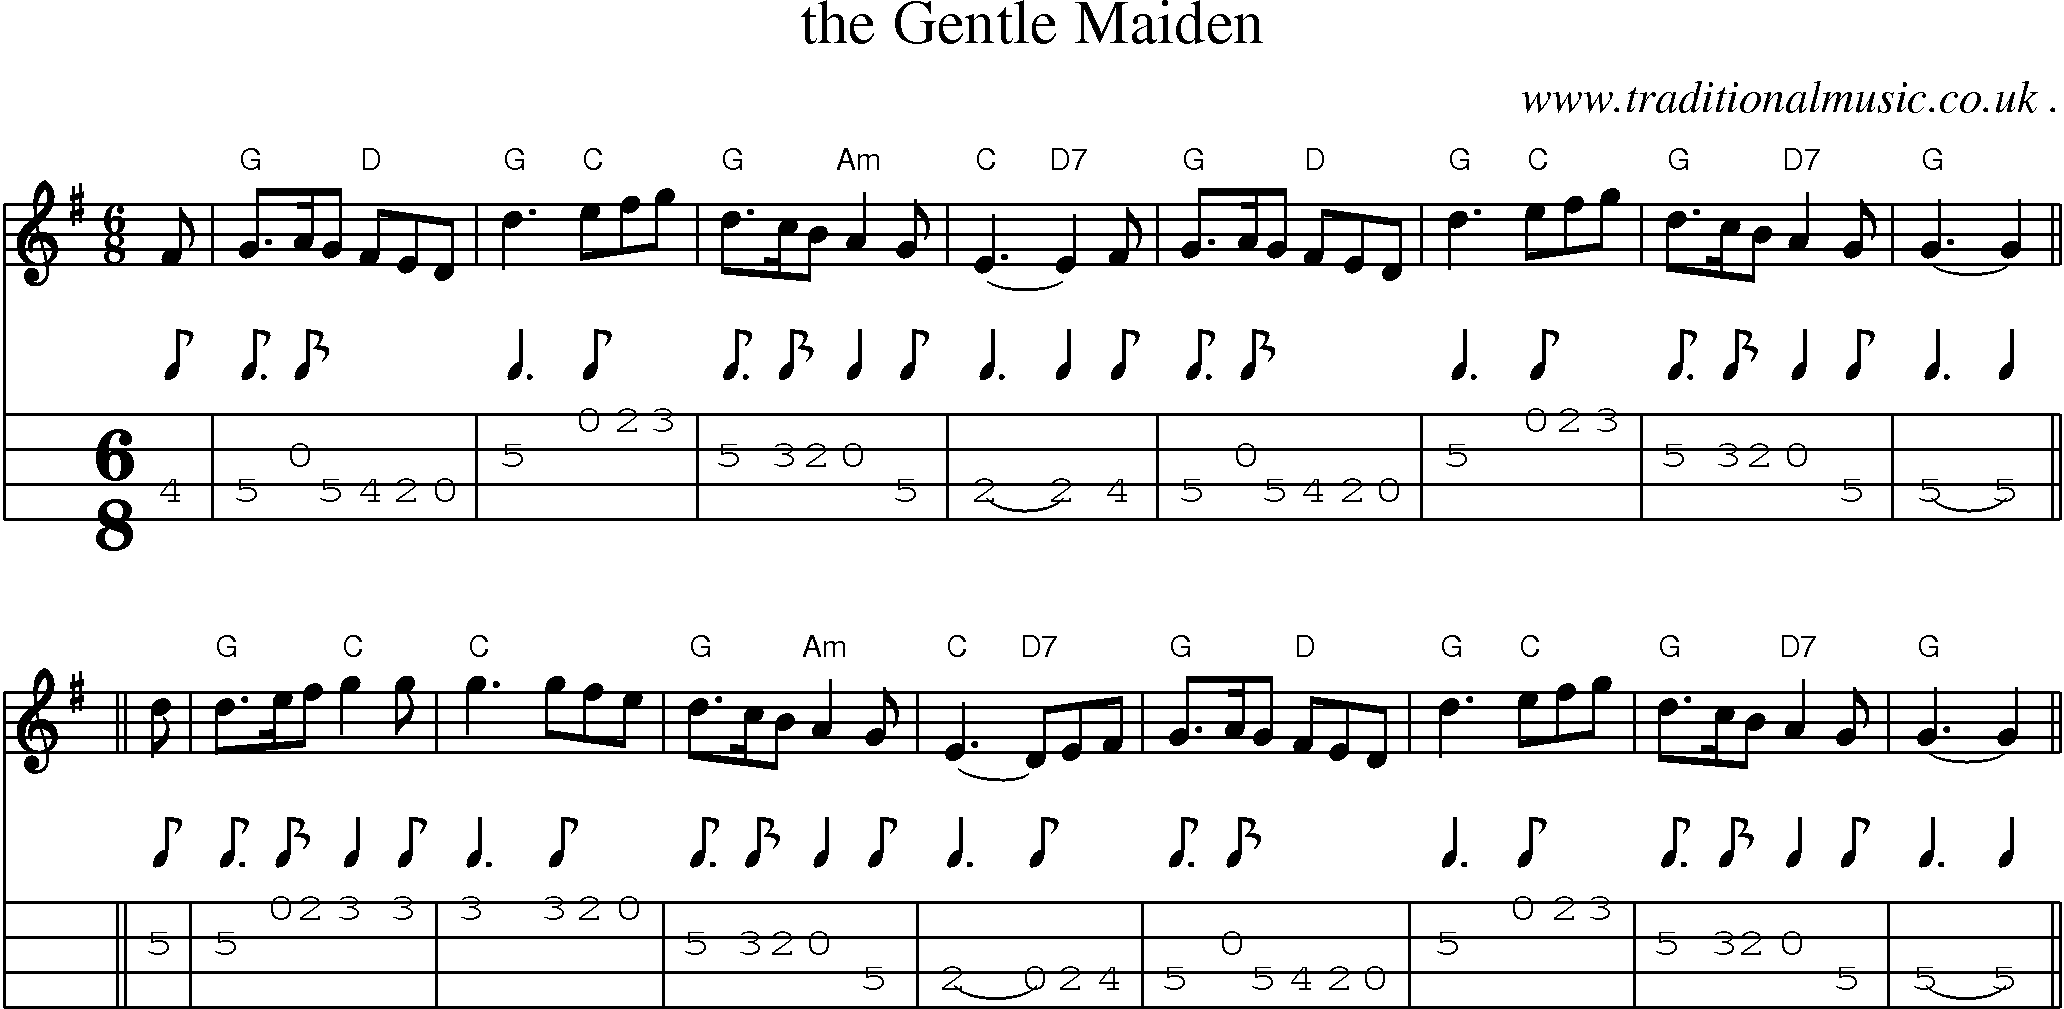 Sheet-music  score, Chords and Mandolin Tabs for The Gentle Maiden